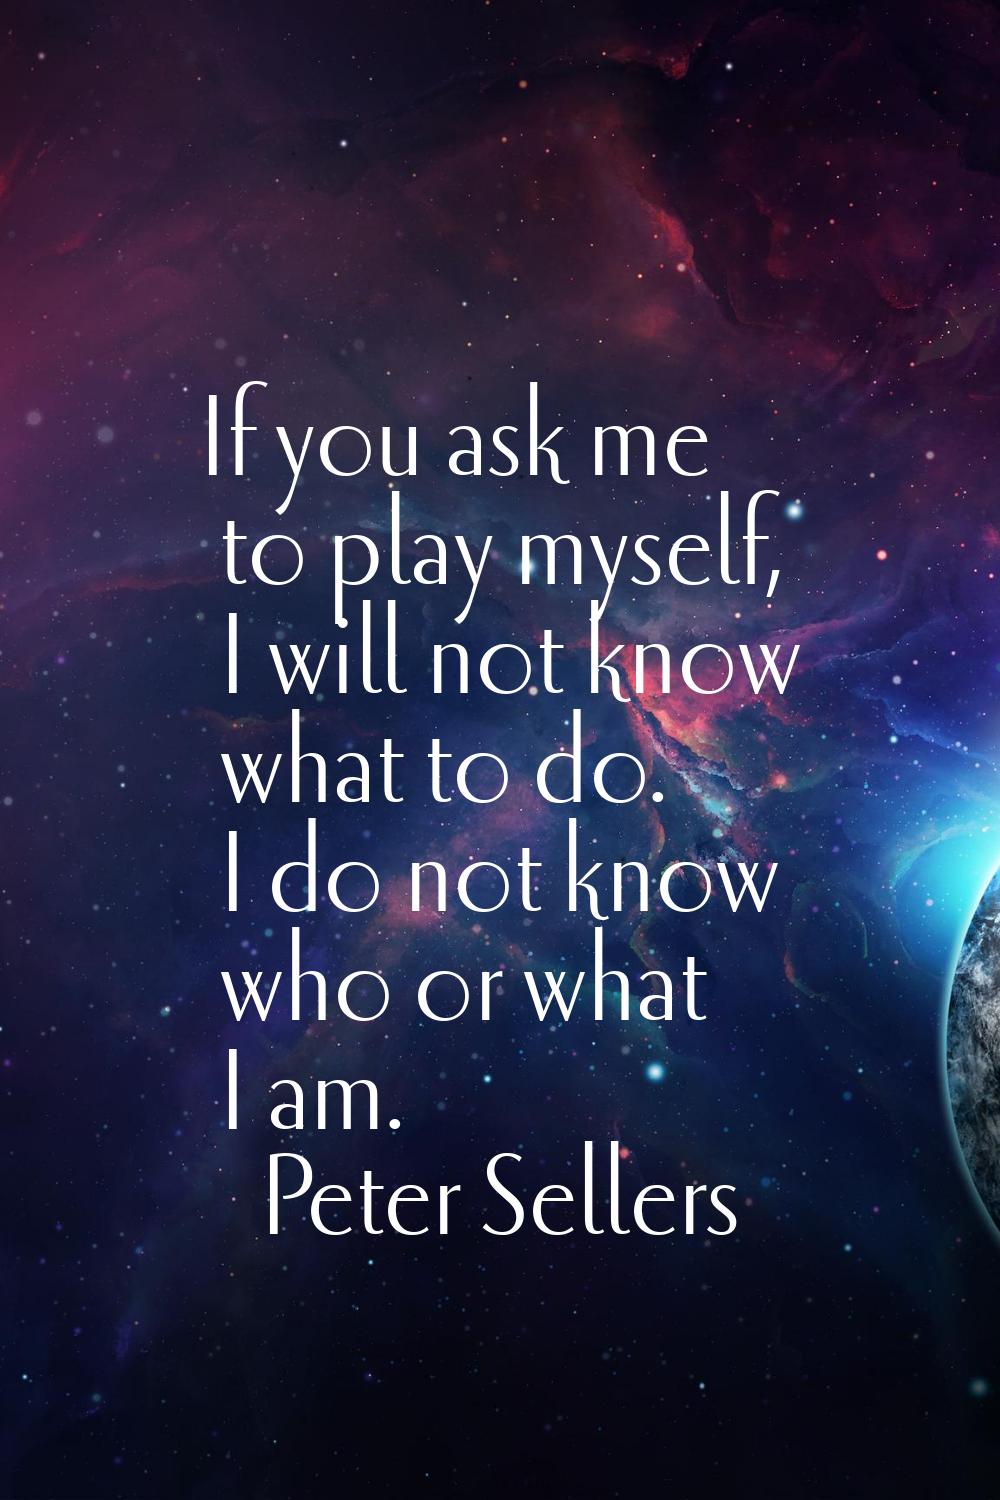 If you ask me to play myself, I will not know what to do. I do not know who or what I am.